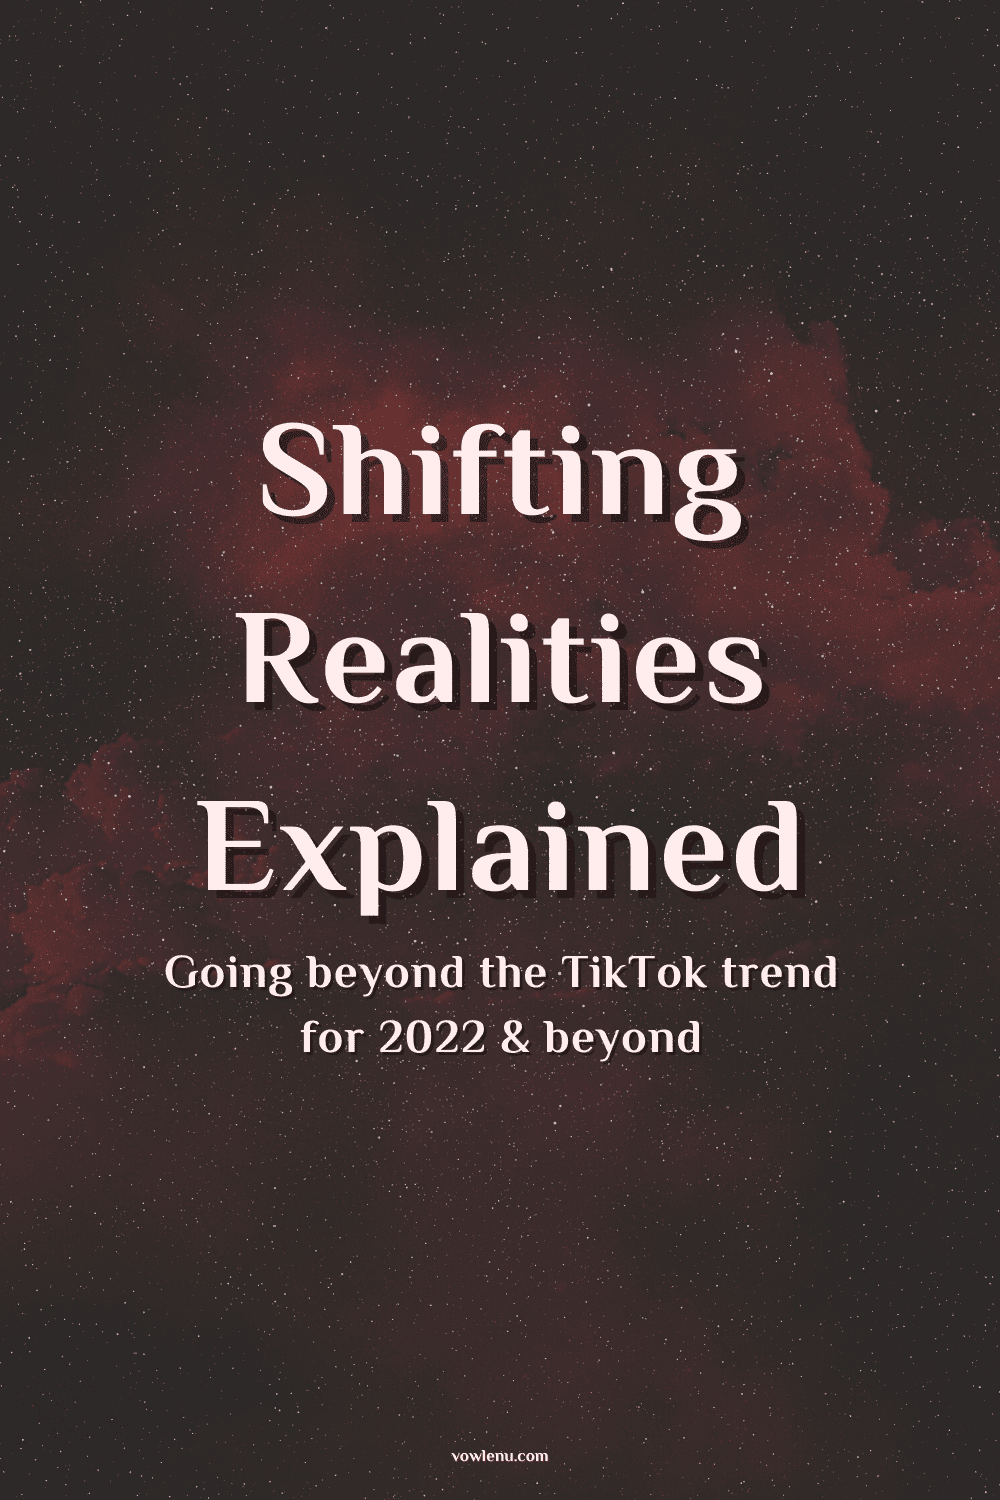 Shifting Realities Explained Going beyond the TikTok trend for 2022 & beyond